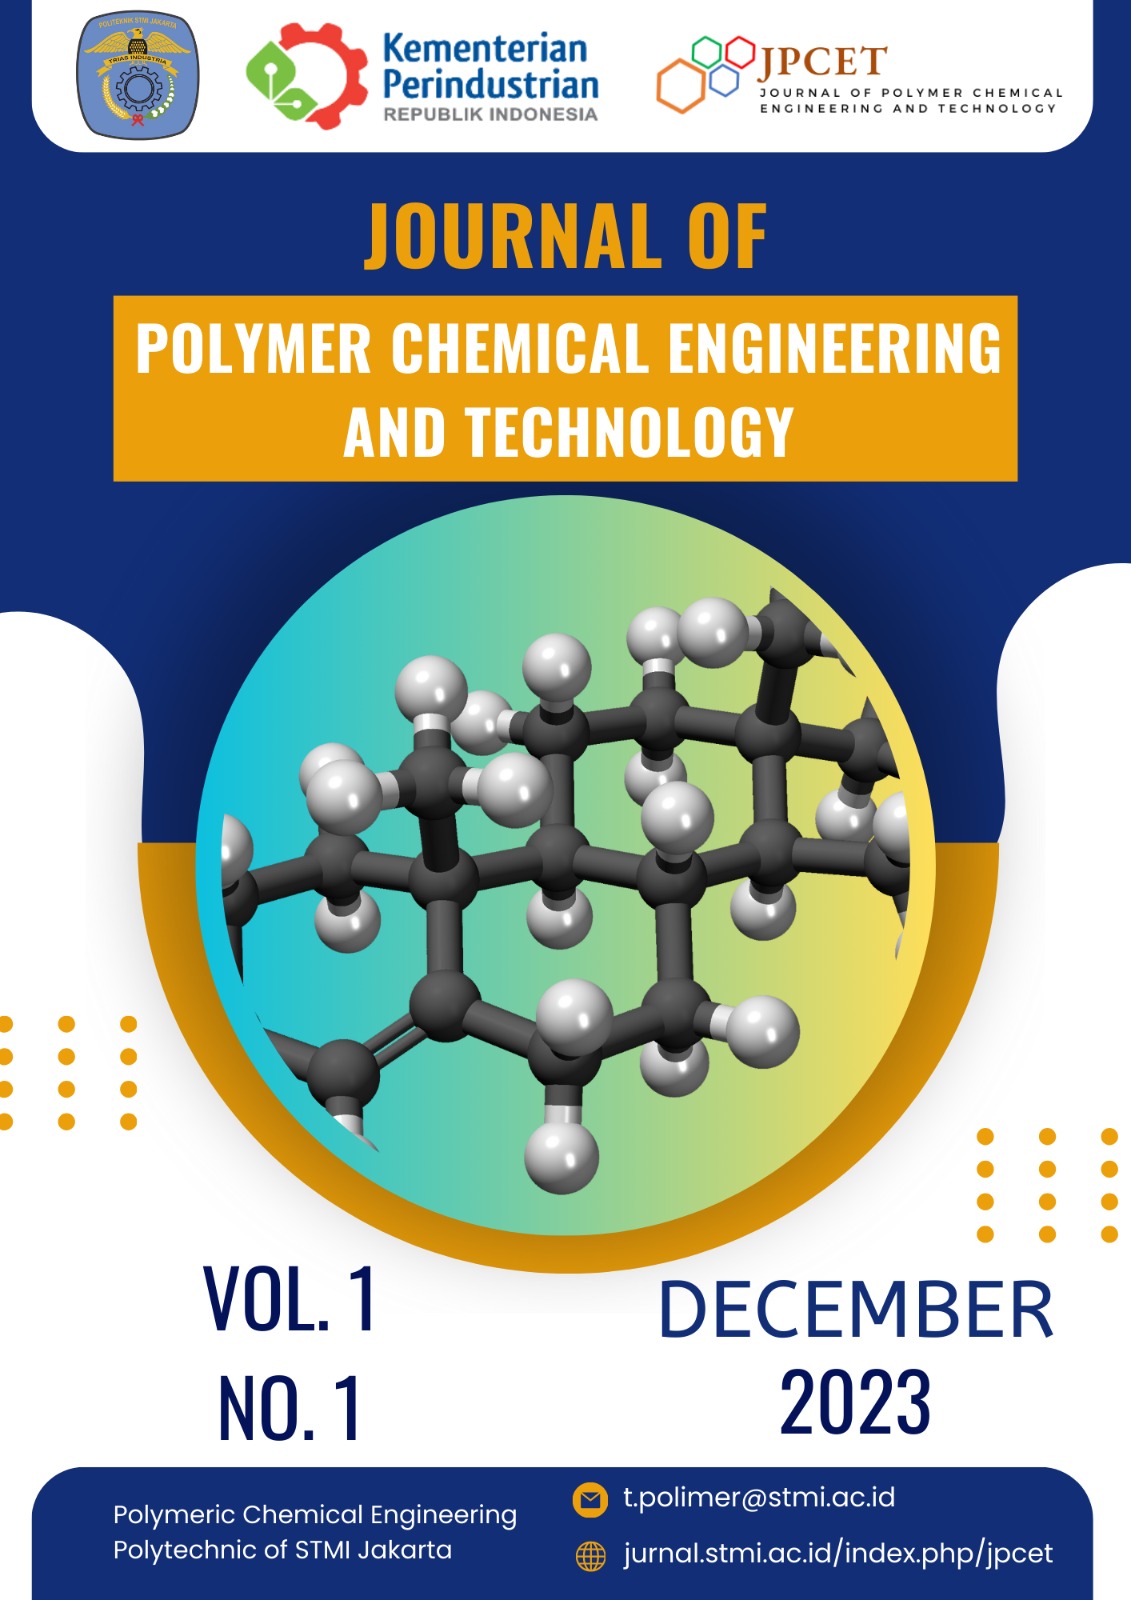 					View Vol. 1 No. 1 (2023): Journal of Polymer Chemical Engineering and Technology (Desember 2023)
				